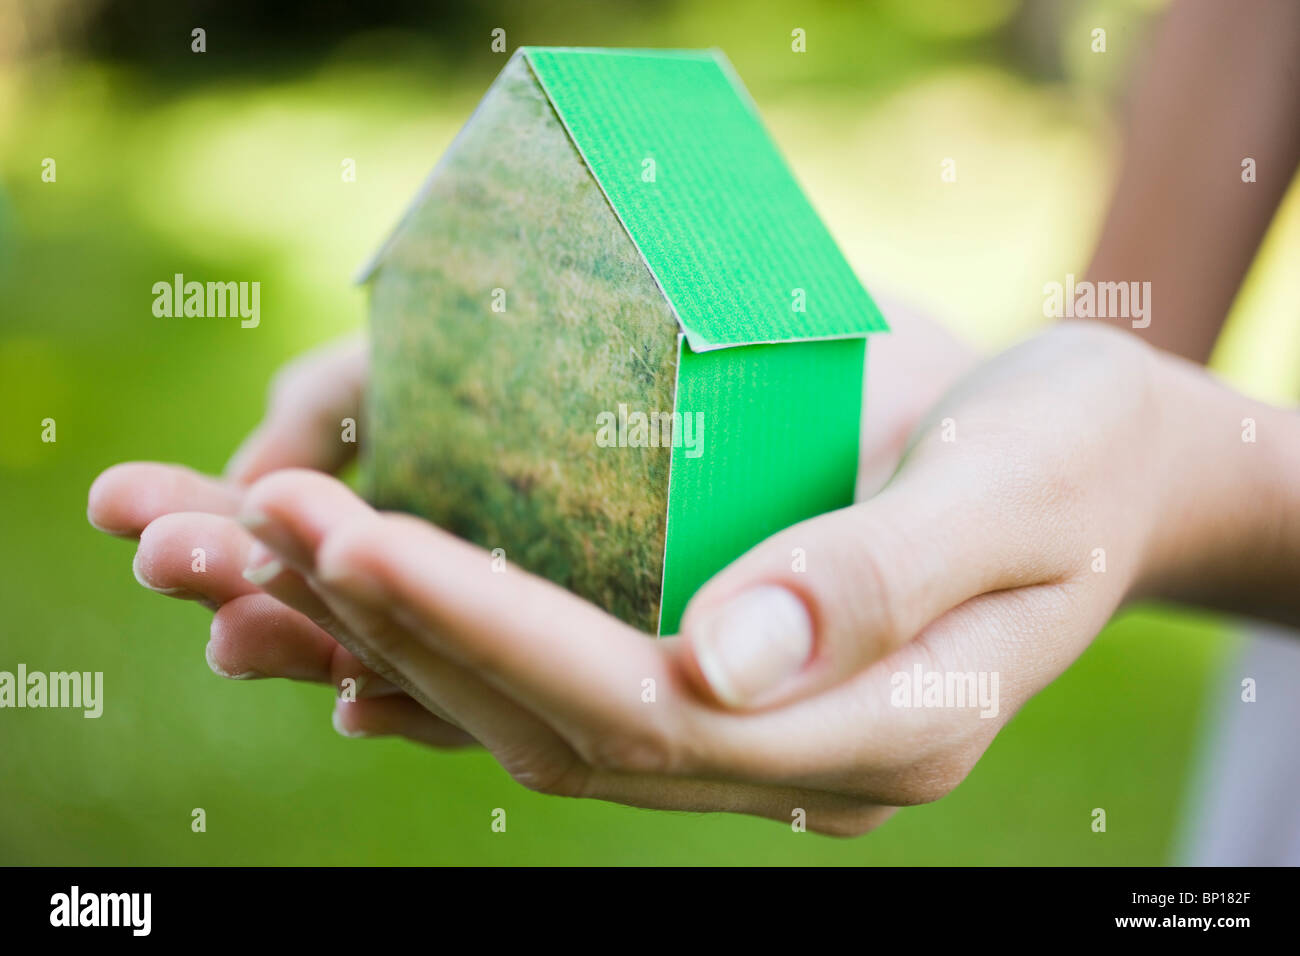 Young woman holding green model house Stock Photo